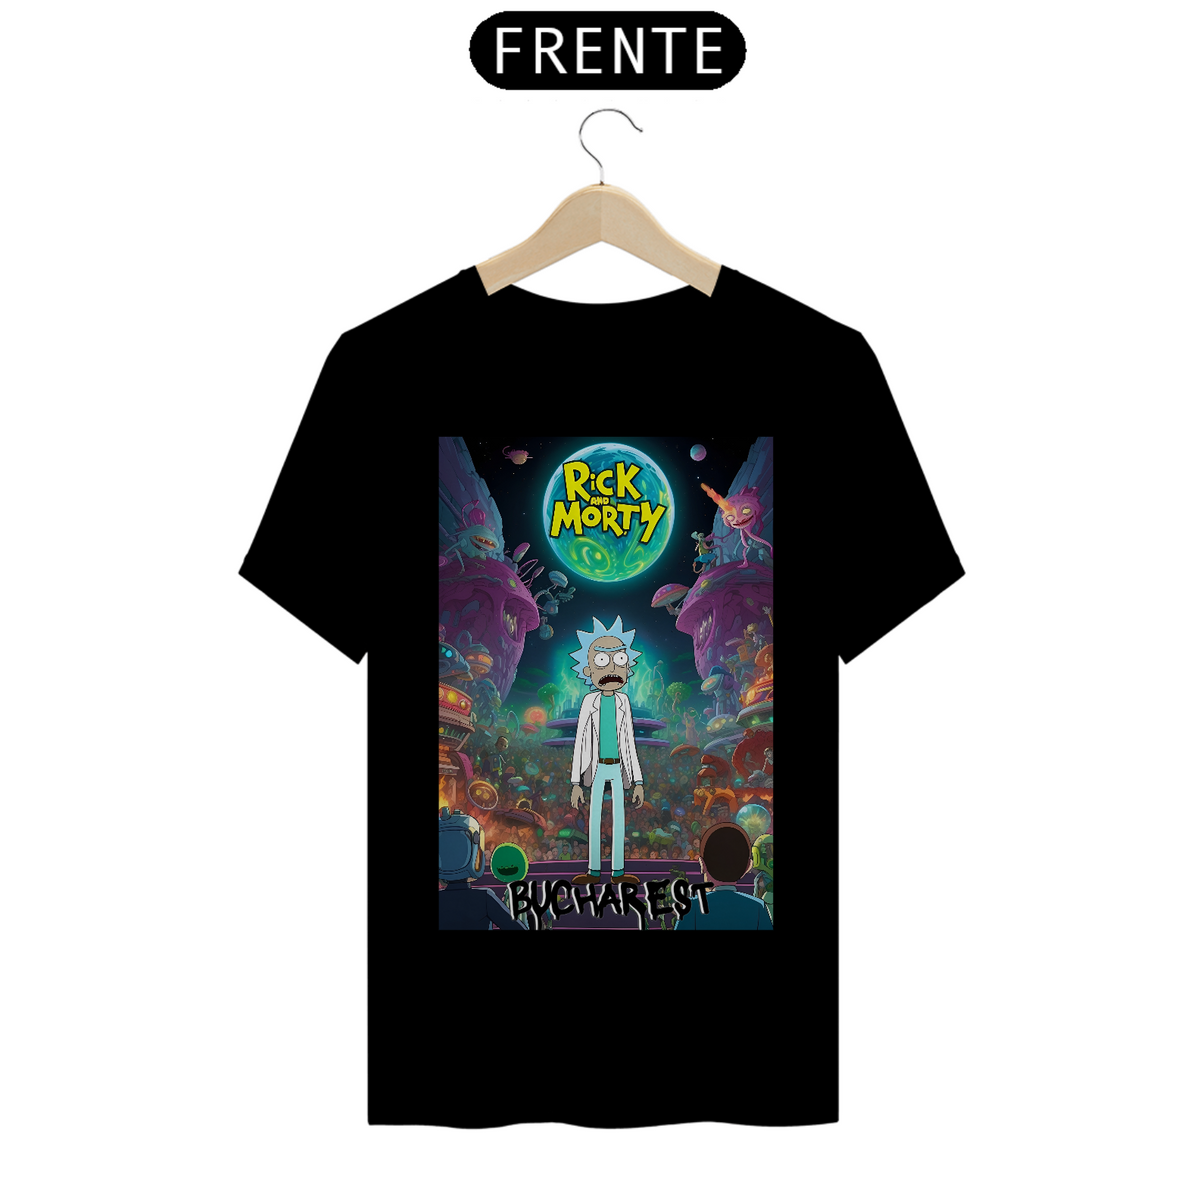 Nome do produto: CAMISETA UNISSEX - Rick and Morty being led into a colossal